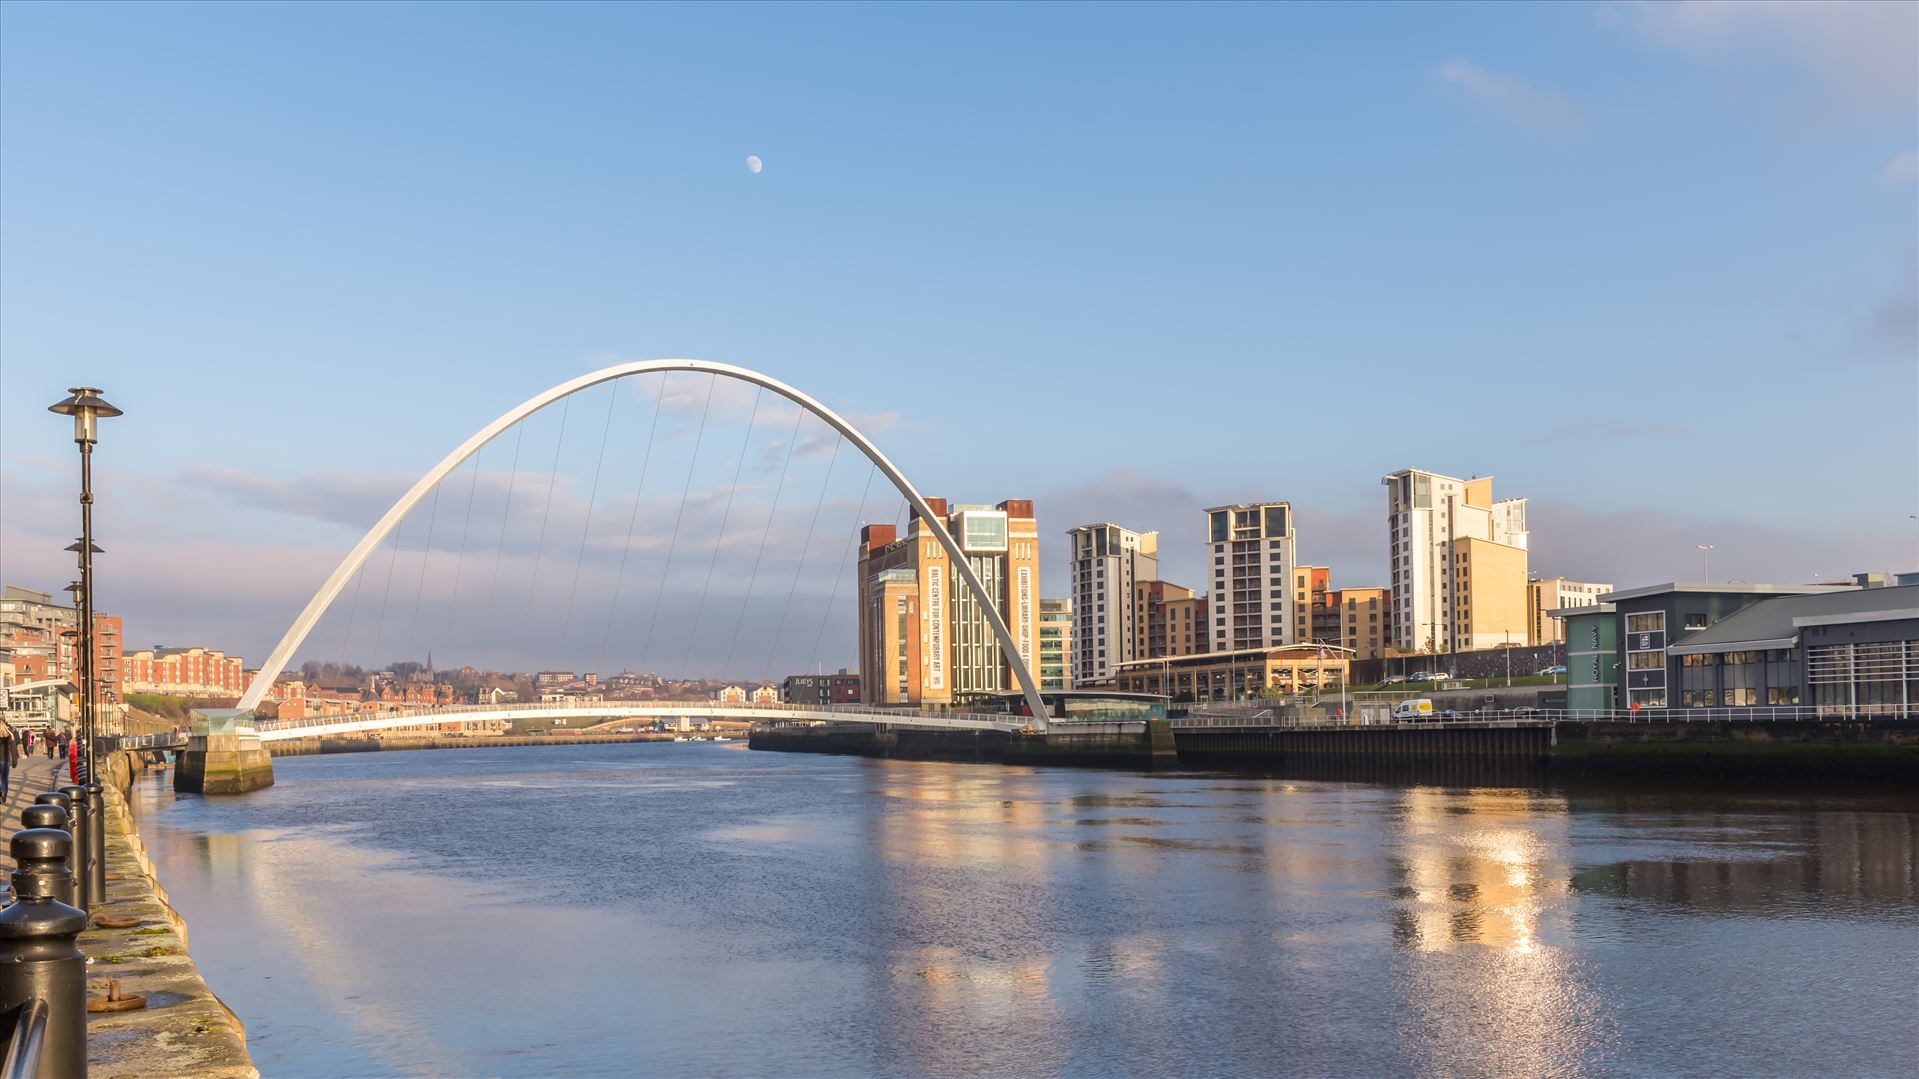 Millennium Bridge & the Baltic centre The Millennium Bridge was first opened in 2001 & spans the River Tyne between Newcastle & Gateshead. by philreay